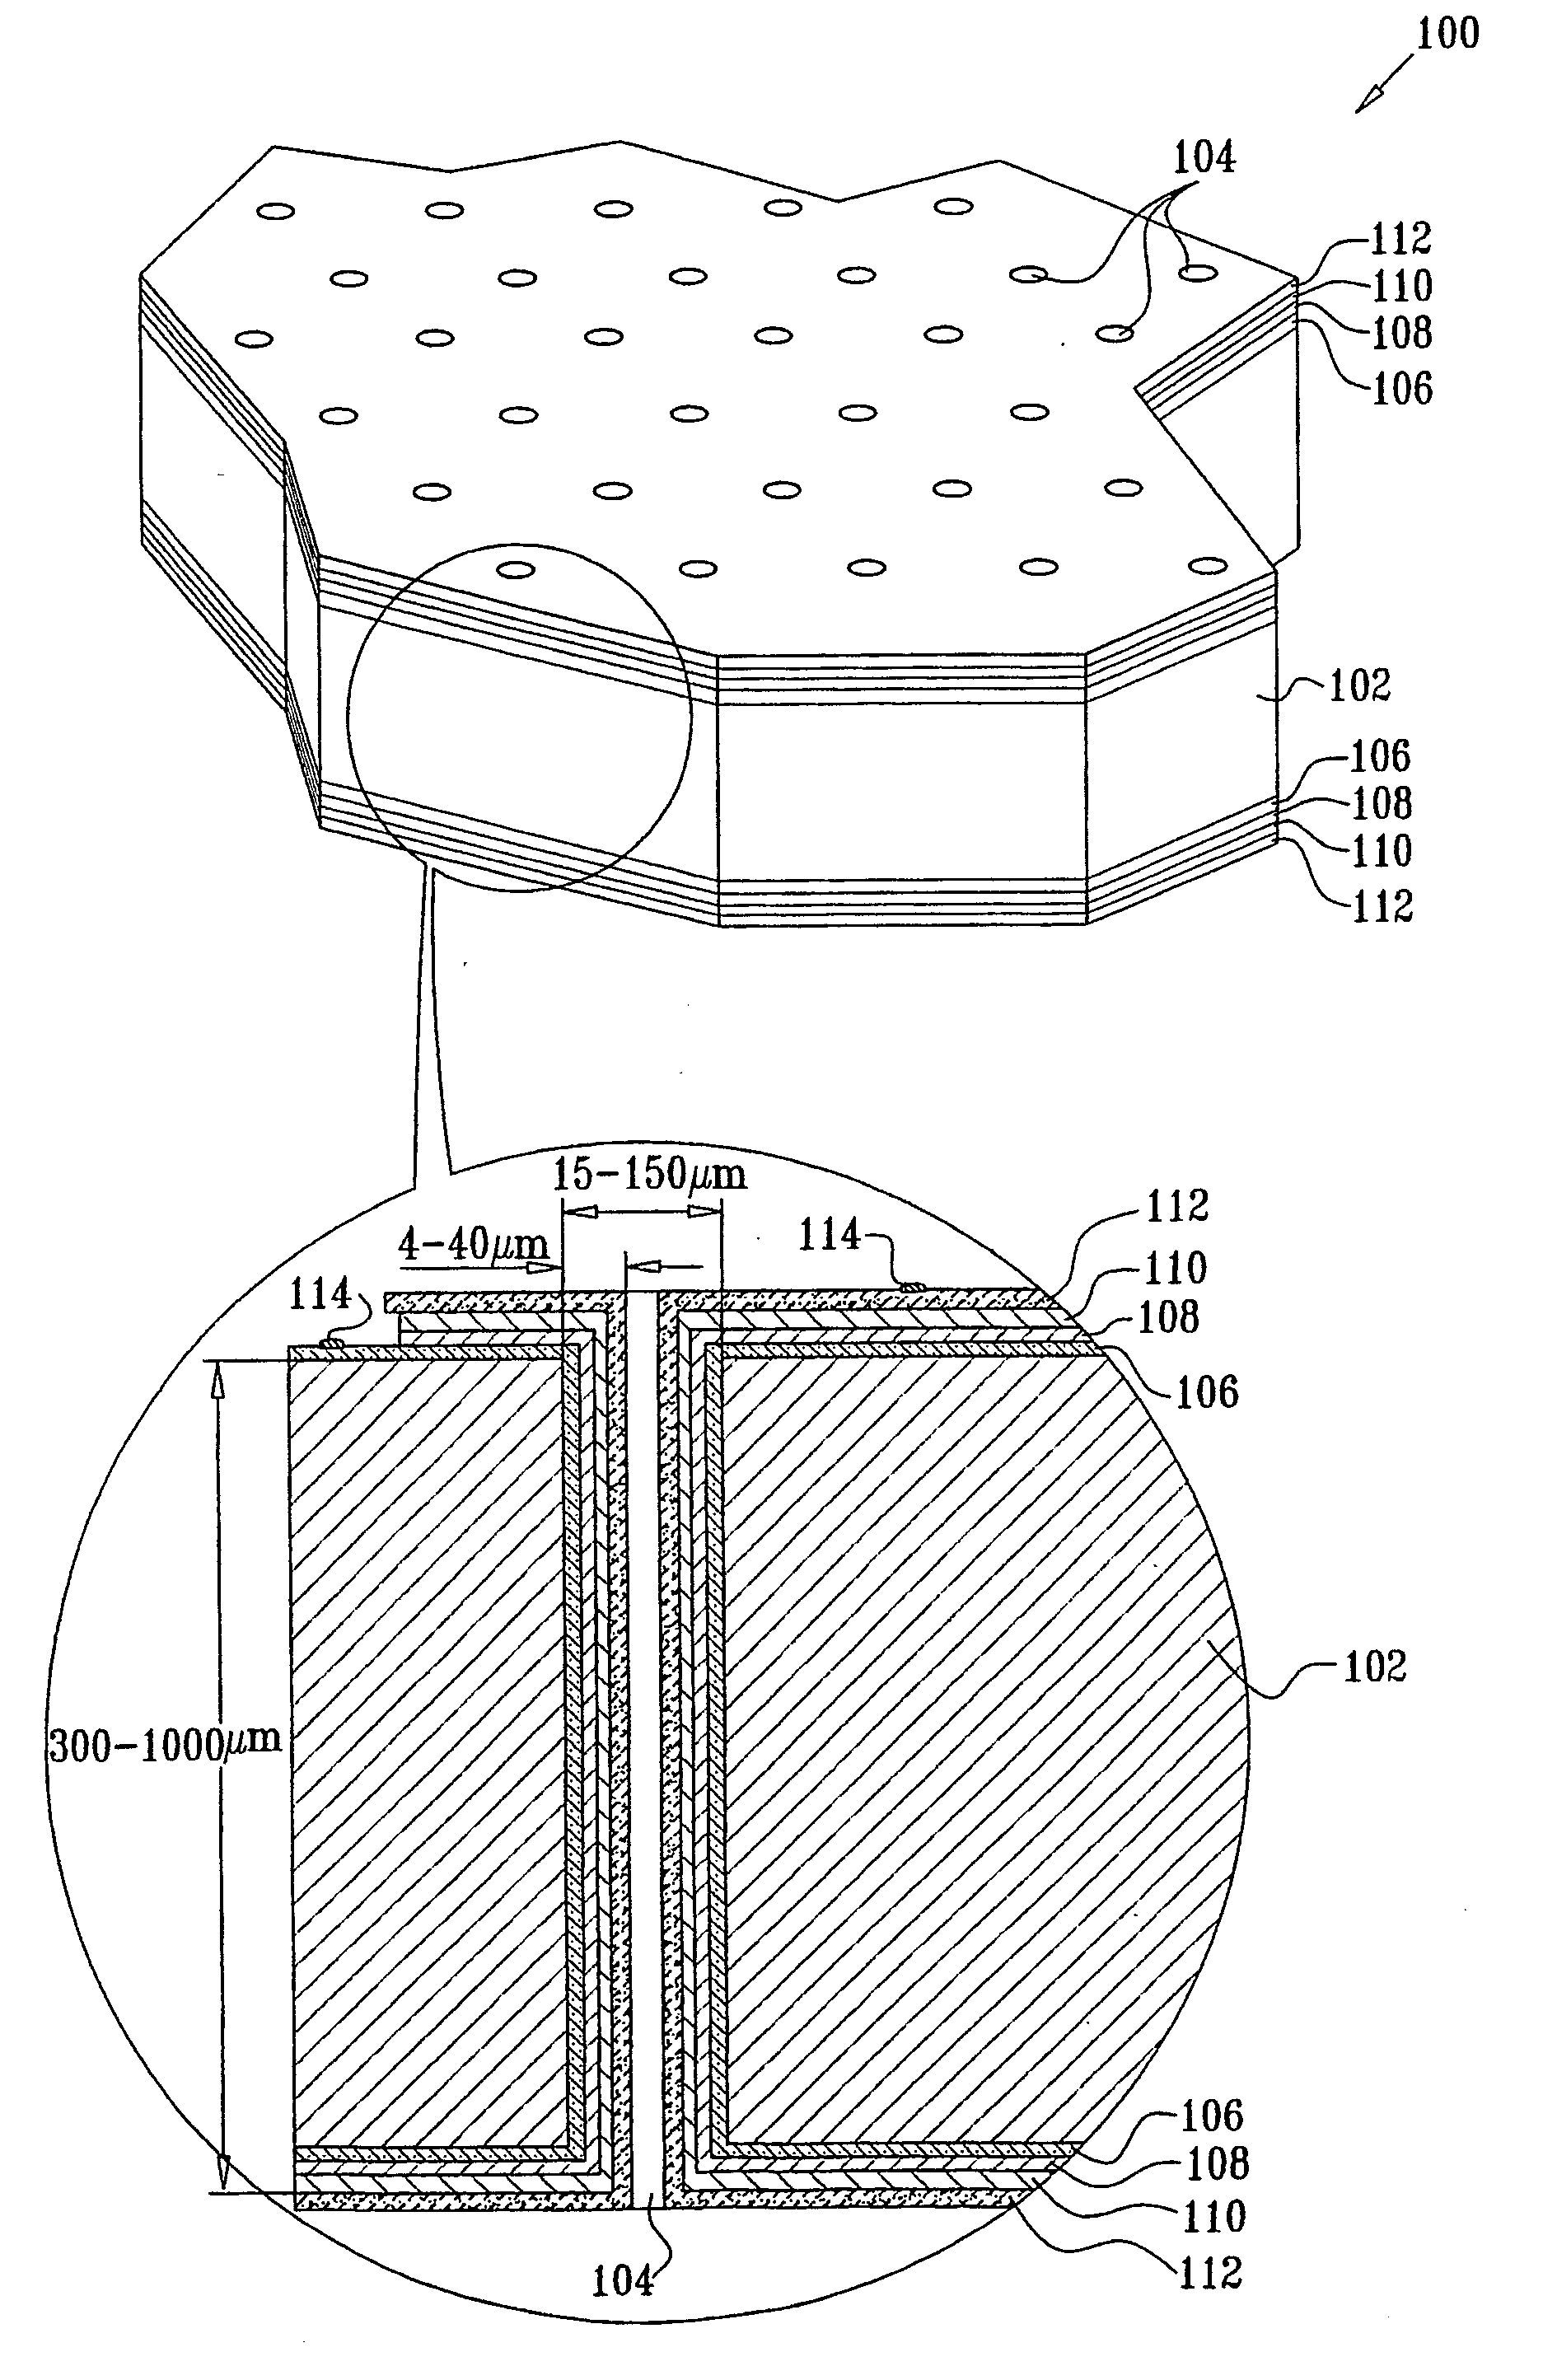 Thin-film cathode for 3-dimensional microbattery and method for preparing such cathode